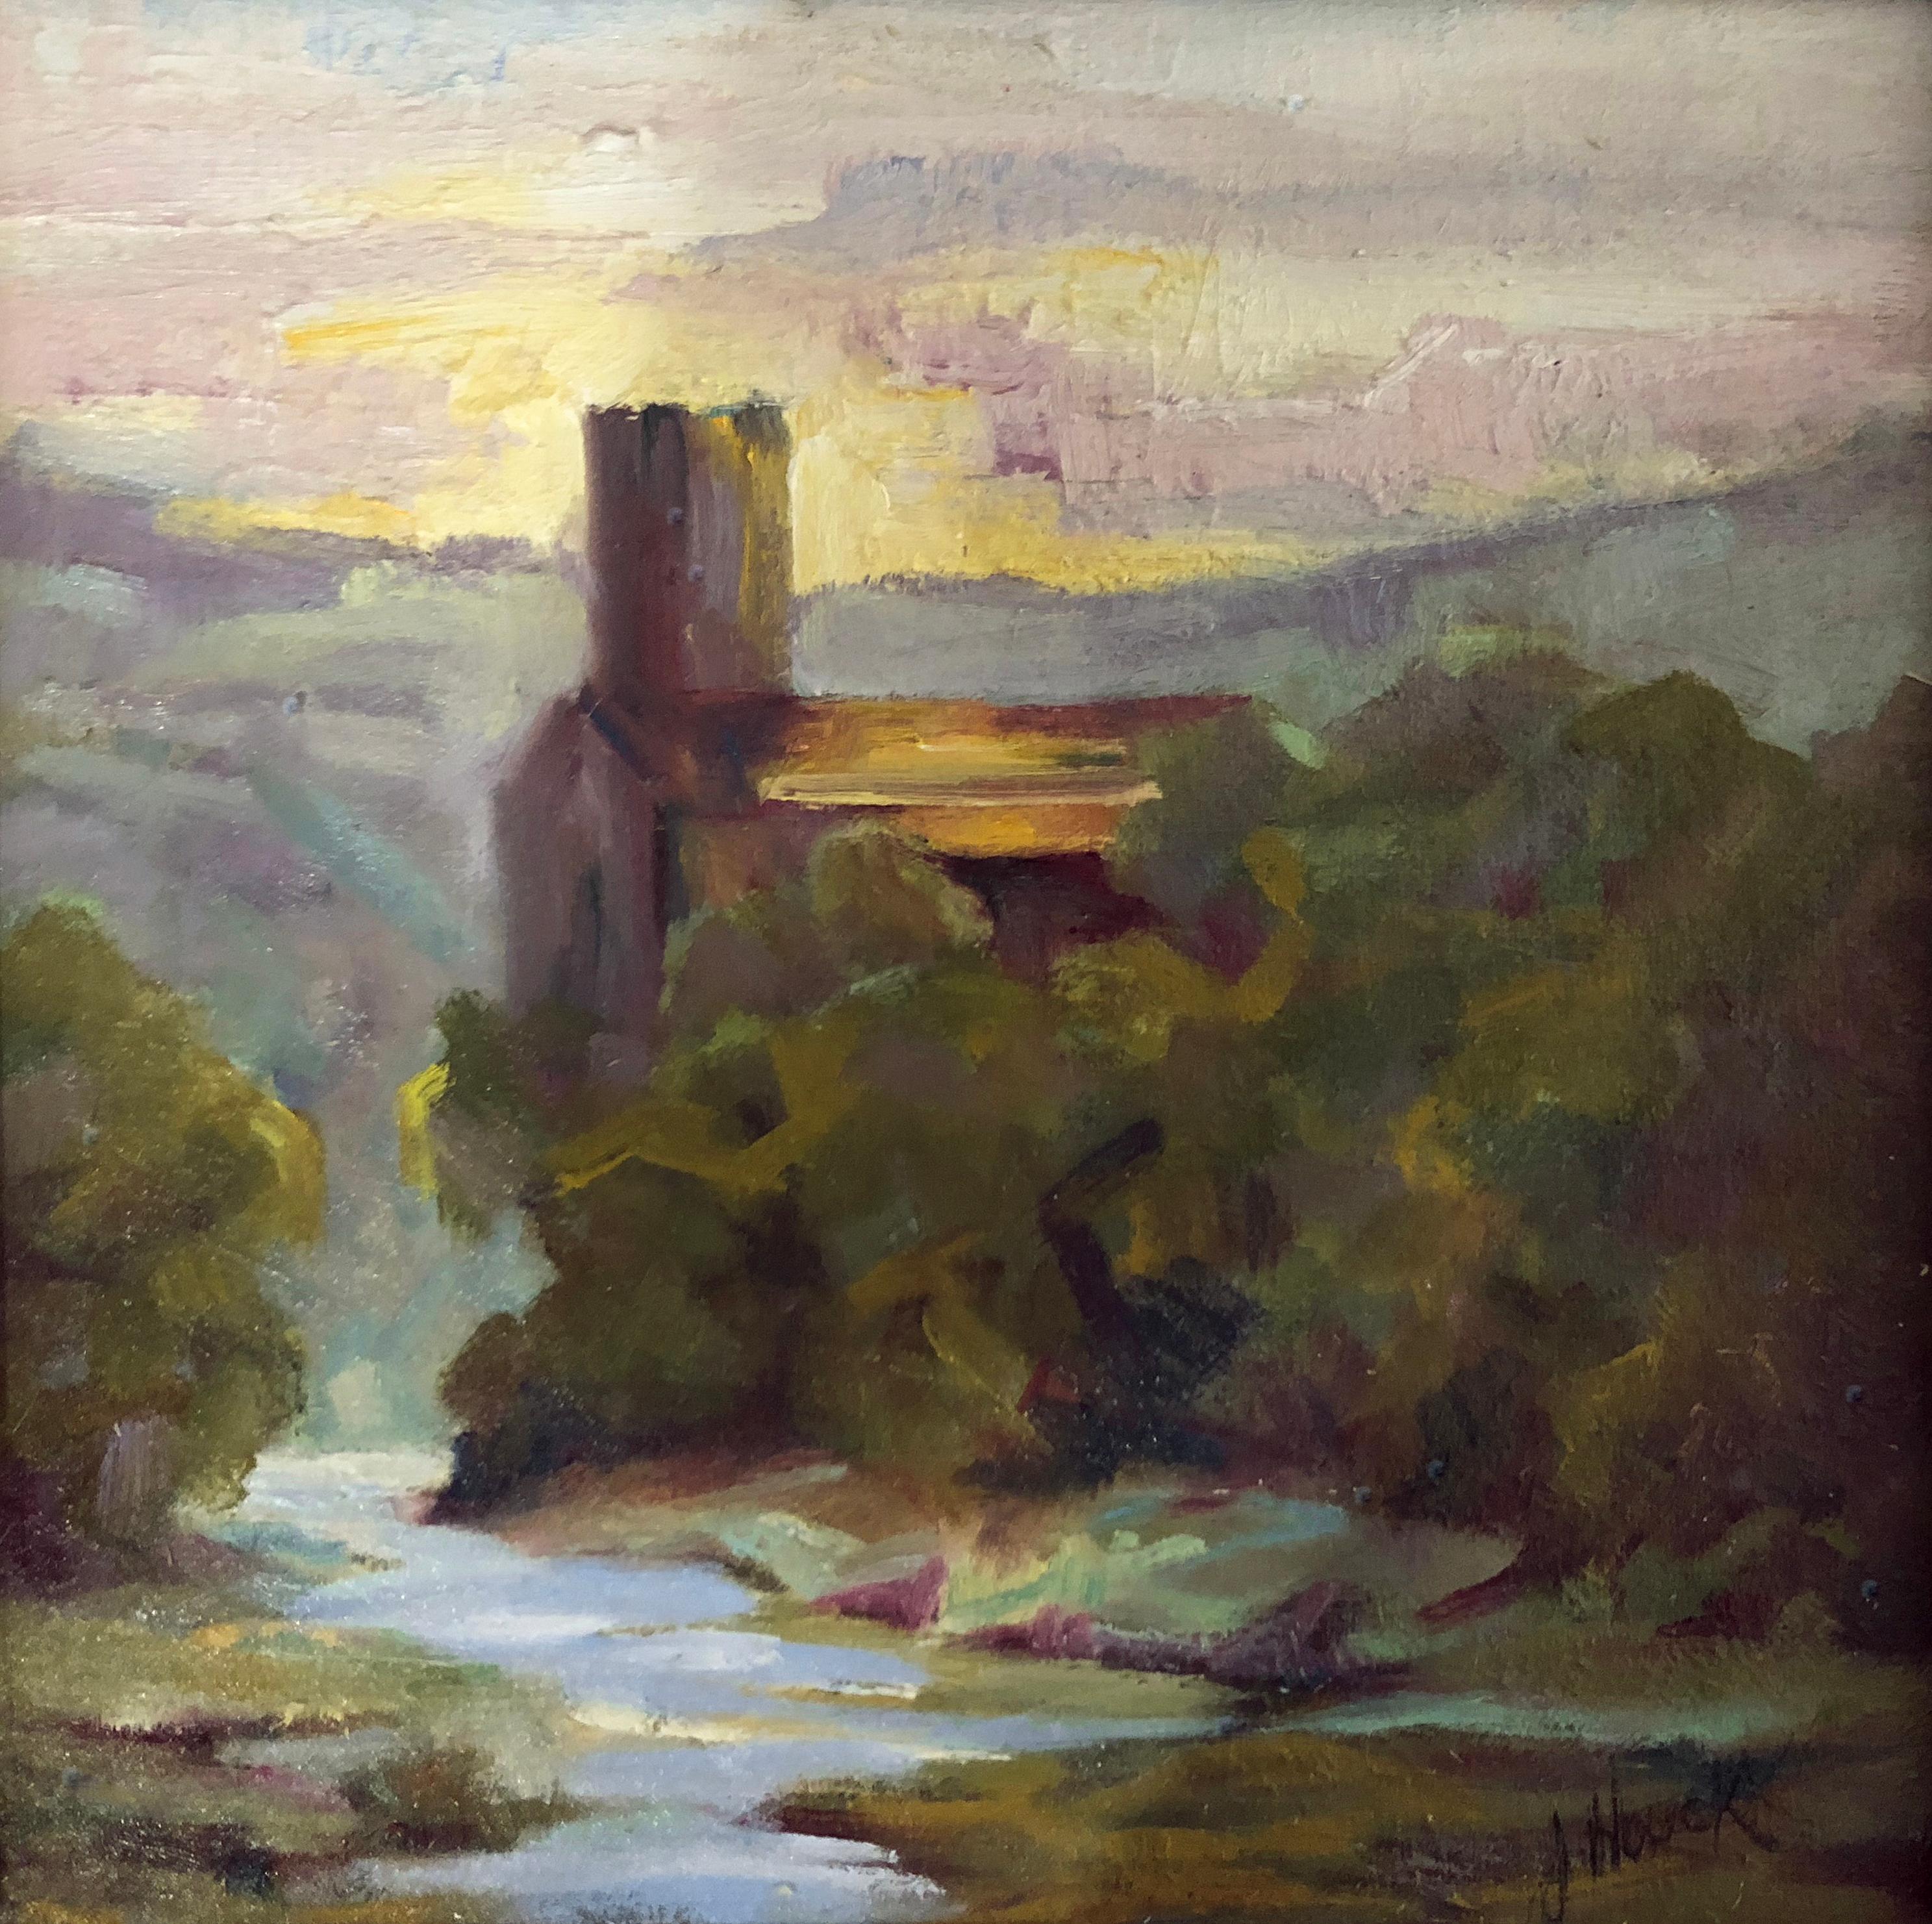 'Lagrasse Afternoon' is a small framed oil on linen Post-Impressionist landscape painting created by American artist Julie Houck in 2018. Featuring an exquisite palette mostly made of dark green, yellow, purple and blue tones, the painting depicts